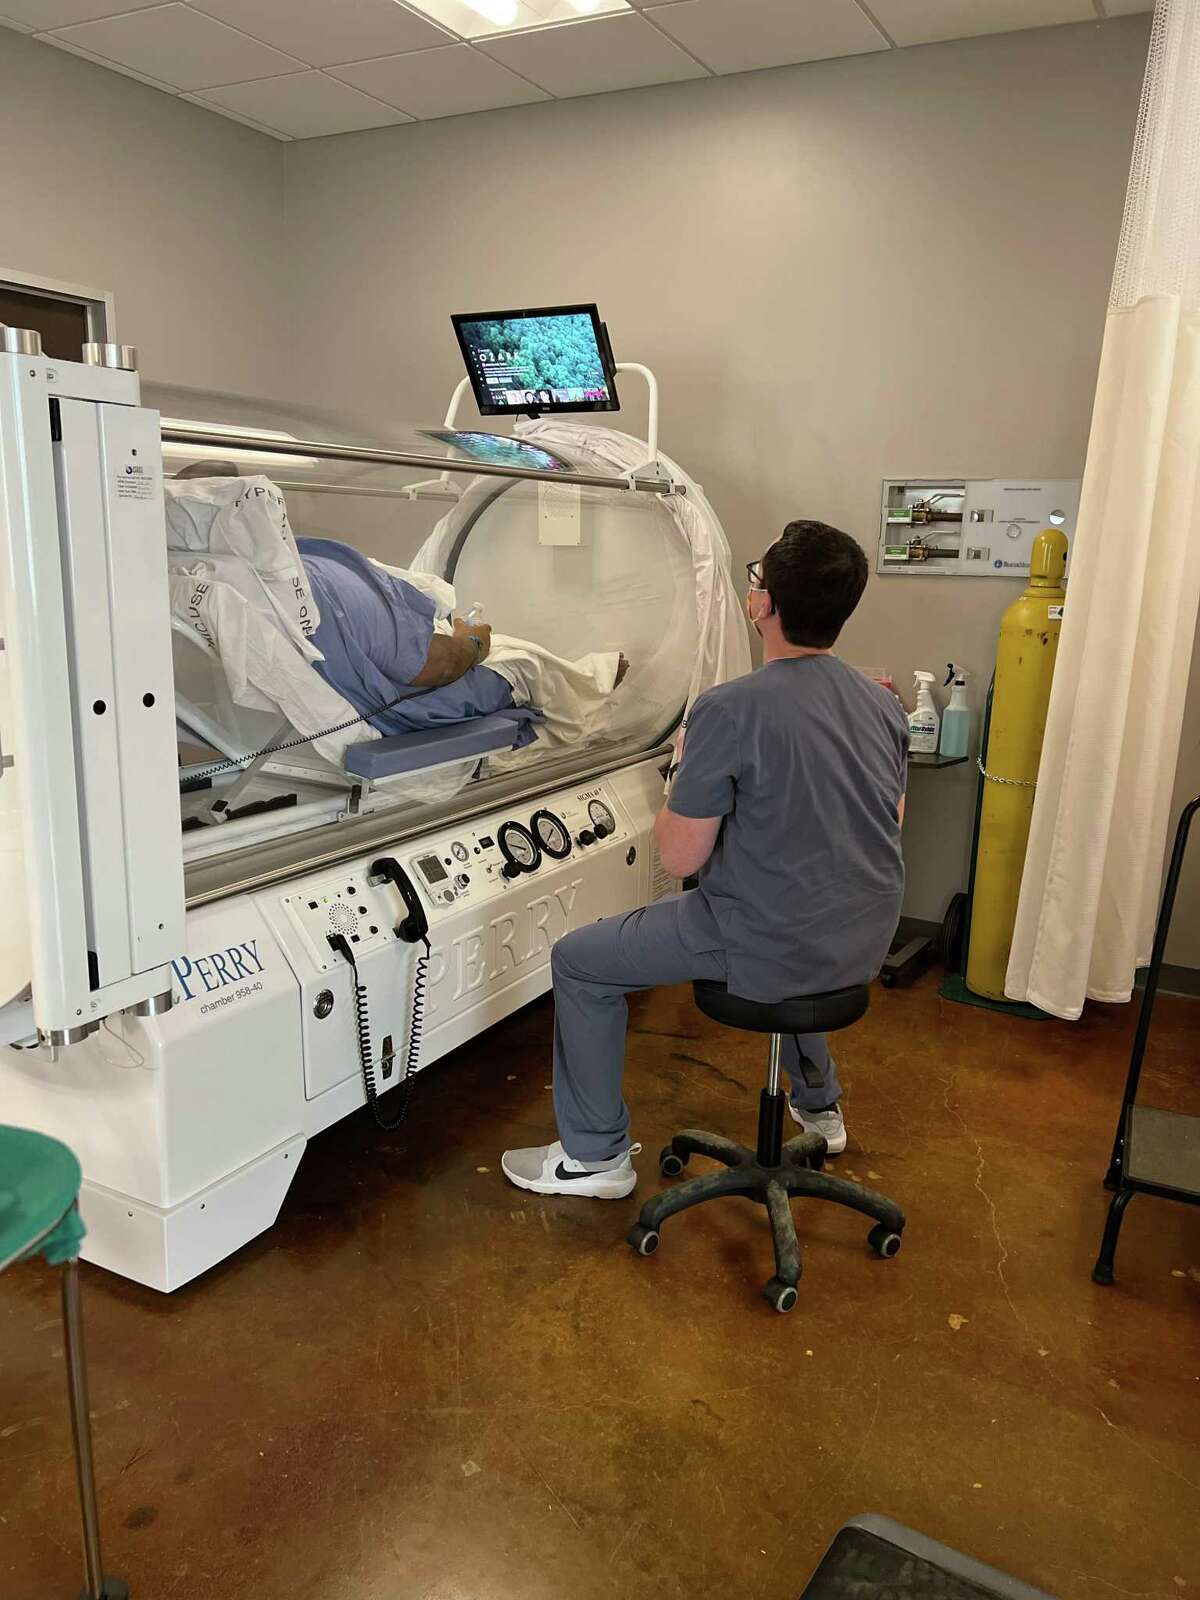 R3 Wound Care and Hyperbarics, a provider of advanced wound care and hyperbaric oxygen therapy services, opened a clinic at 8540 Broadway in Pearland. The therapy delivers pressurized oxygen to injured areas of the body to aid in the healing process.